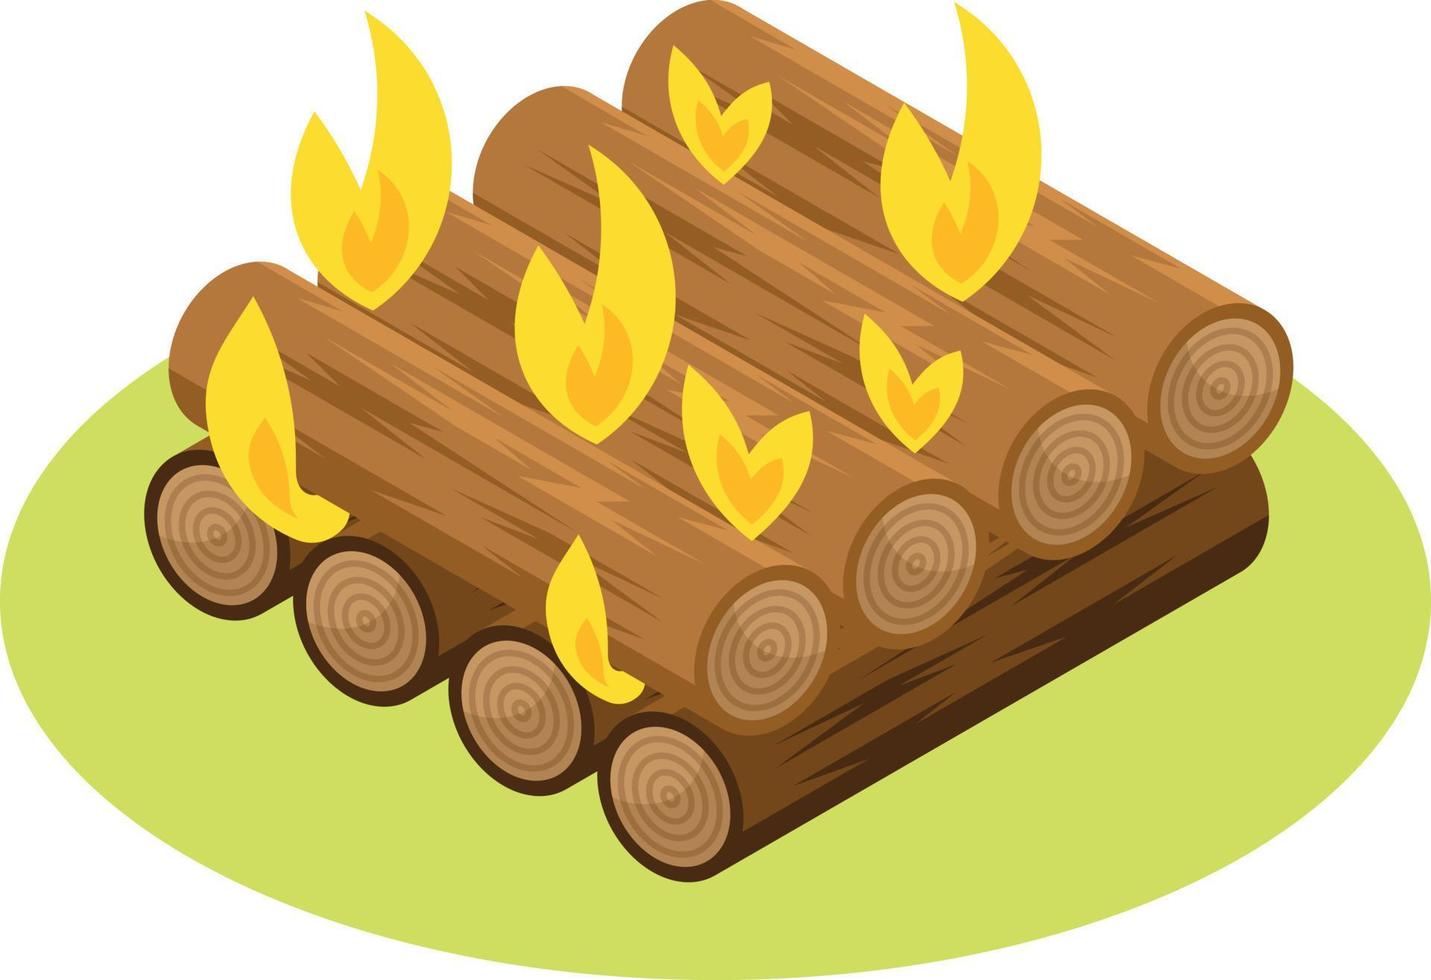 Vector Image Of Wood Logs On Fire